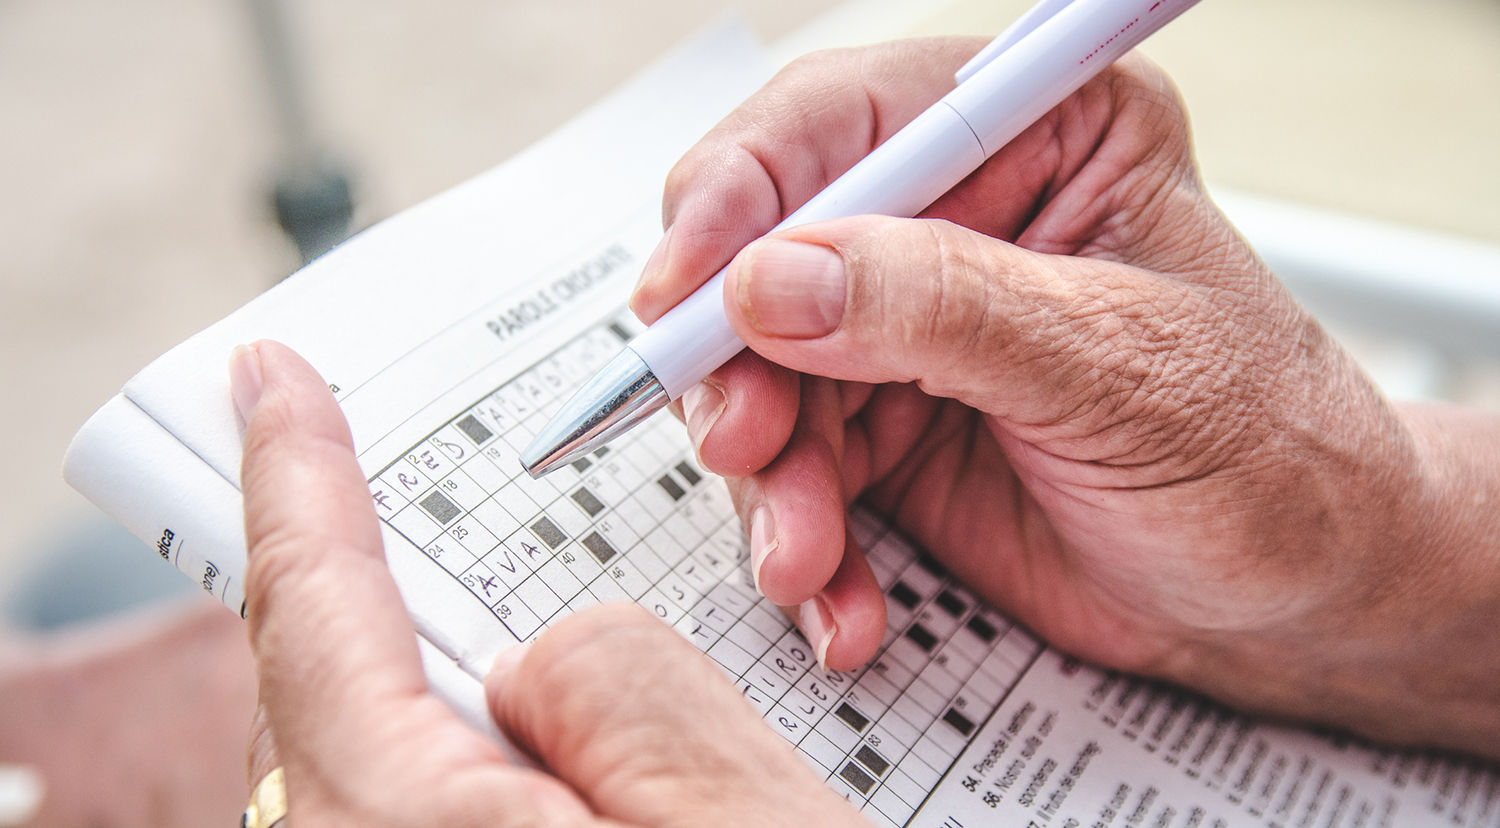 Crosswords and chess may help more than socializing in avoiding dementia